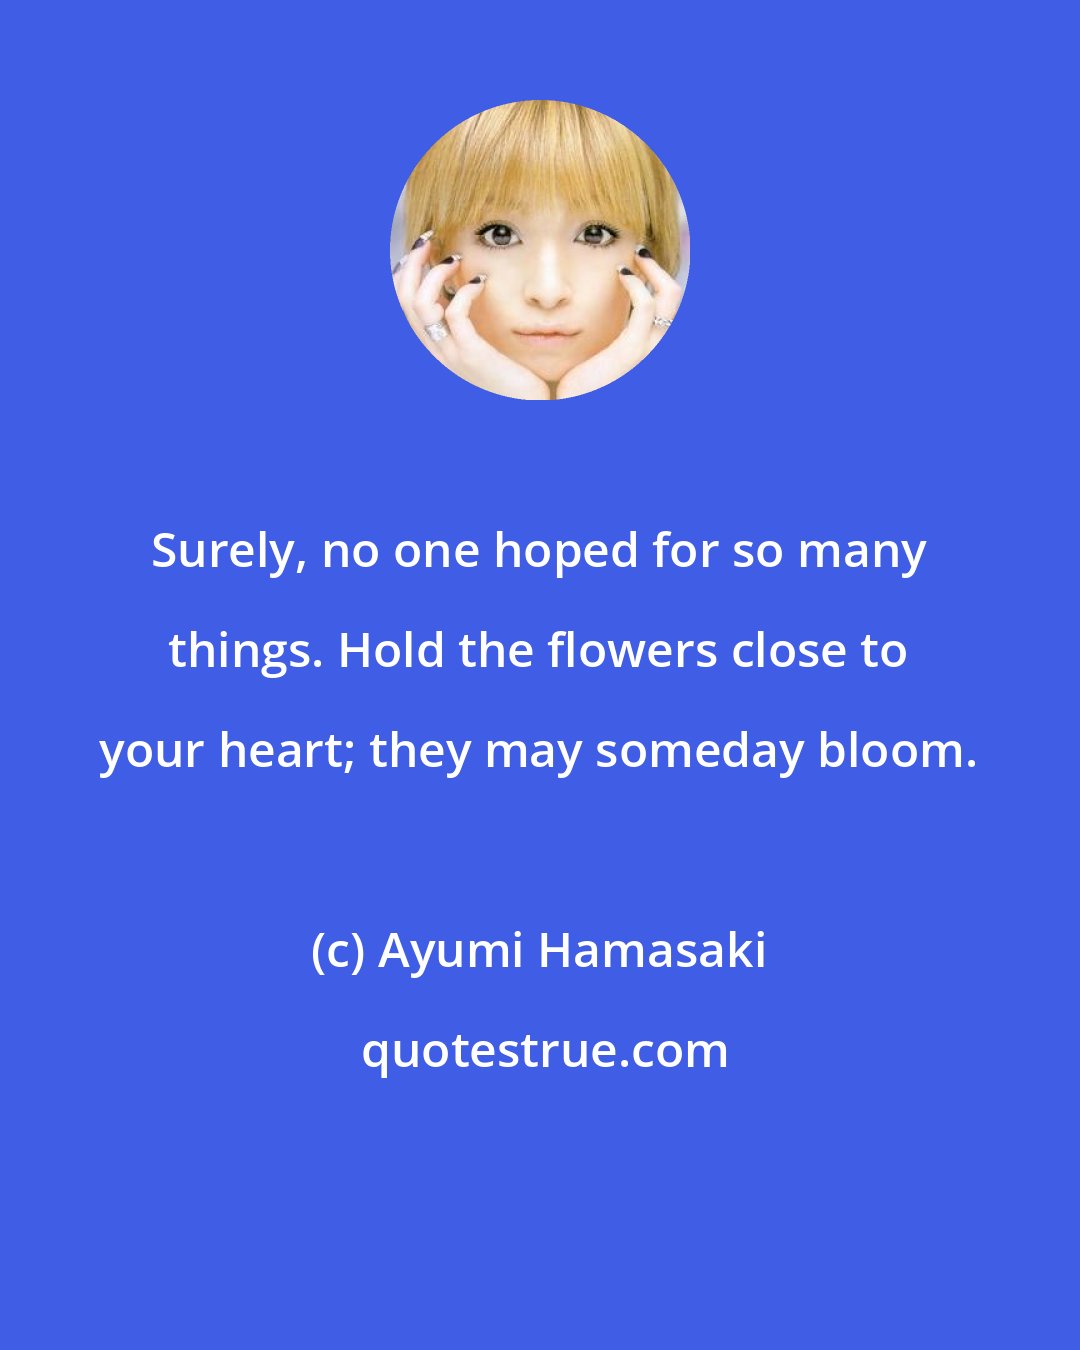 Ayumi Hamasaki: Surely, no one hoped for so many things. Hold the flowers close to your heart; they may someday bloom.